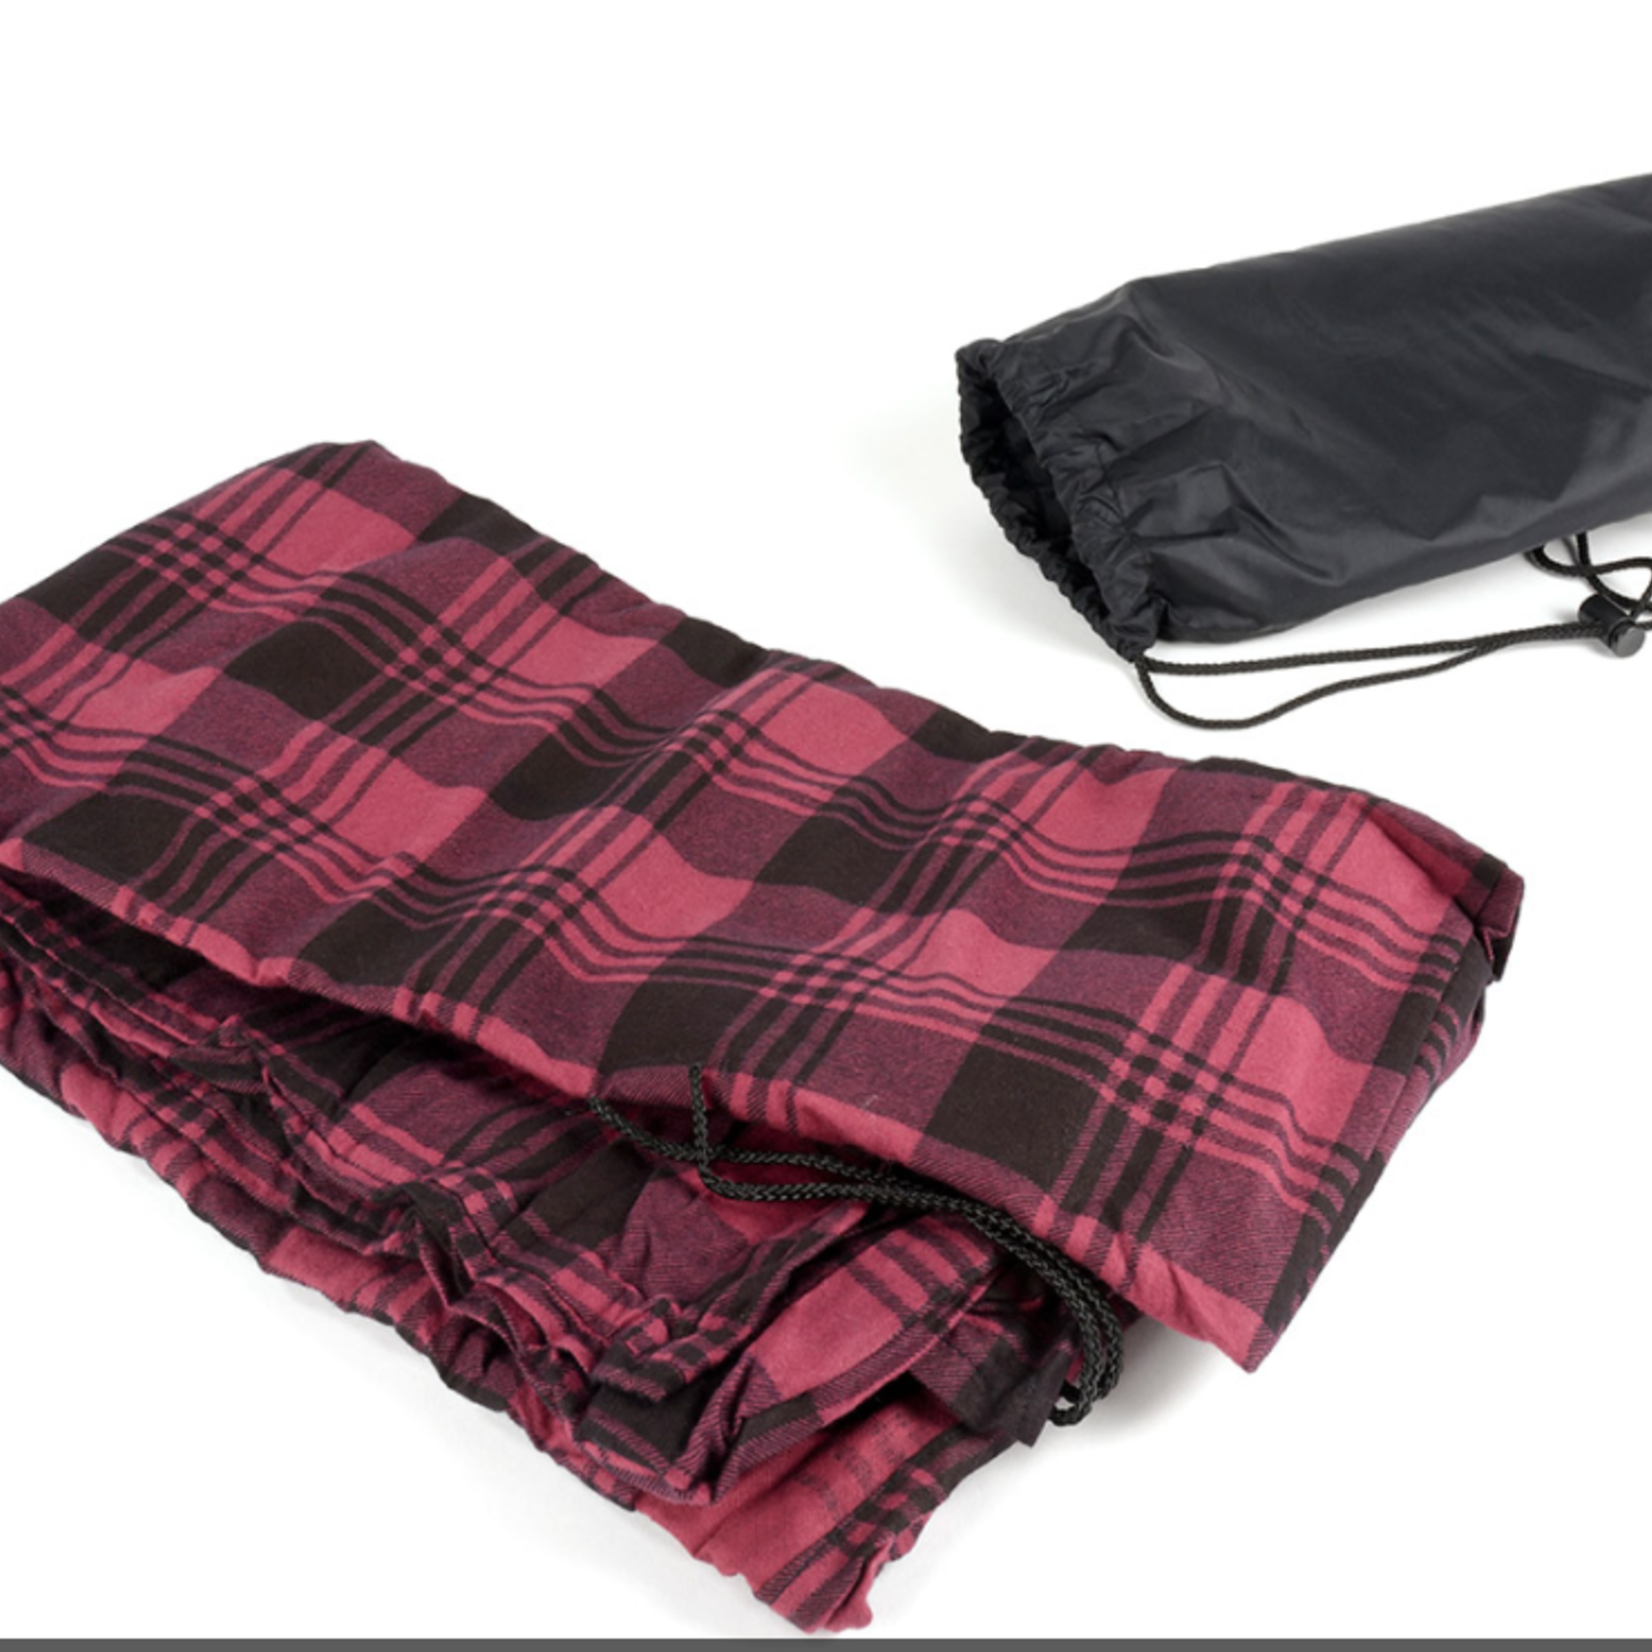 Chinooktec Red mummy flannel sleeping bag protector